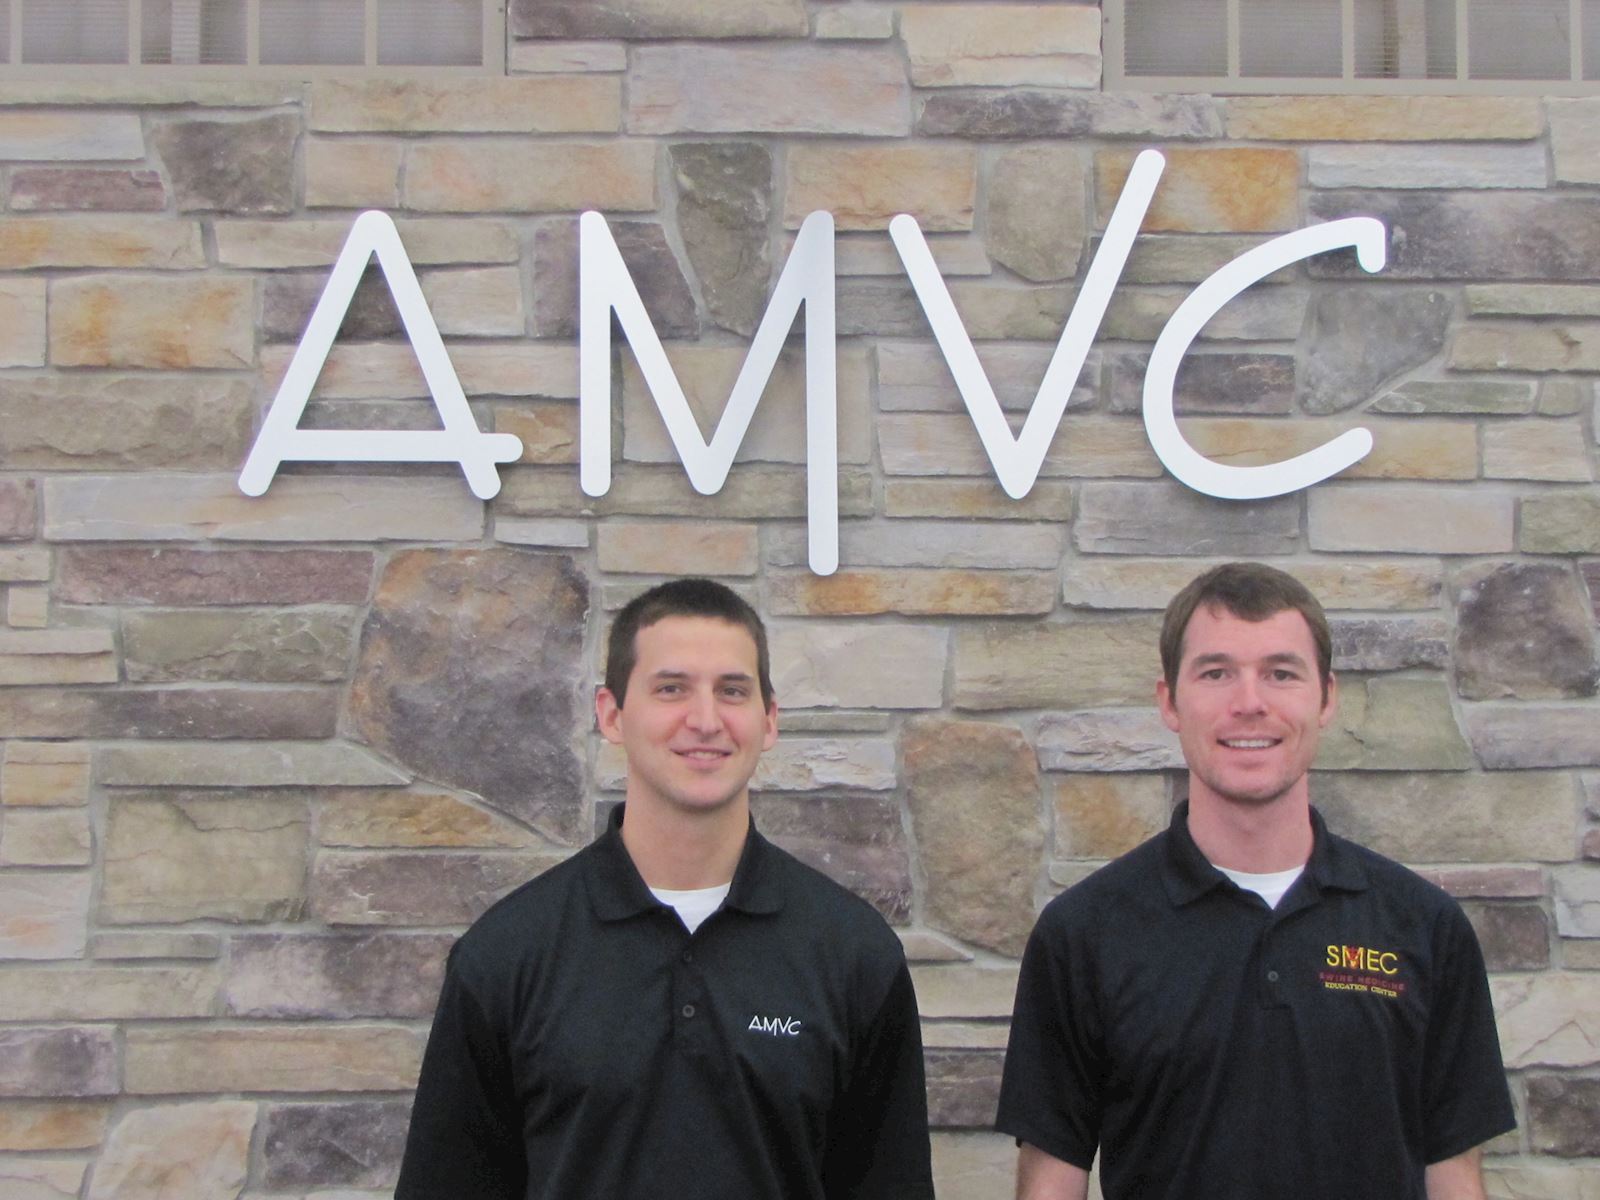 AMVC and SMEC enhance the future of the swine industry